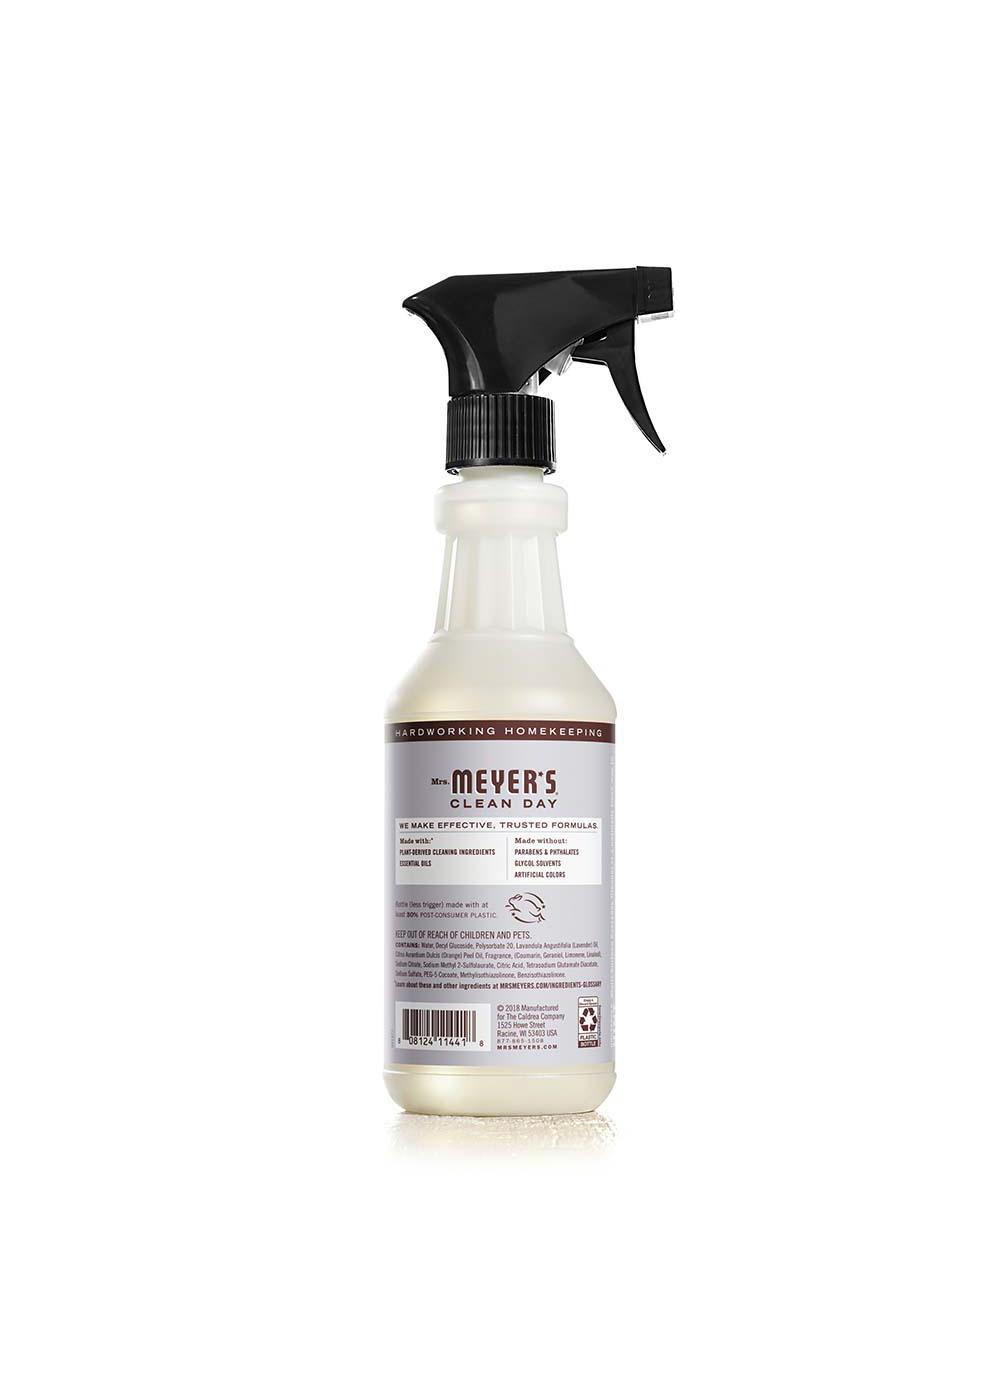 Mrs. Meyer's Clean Day Lavender Scent Multi-Surface Cleaner Spray; image 5 of 5